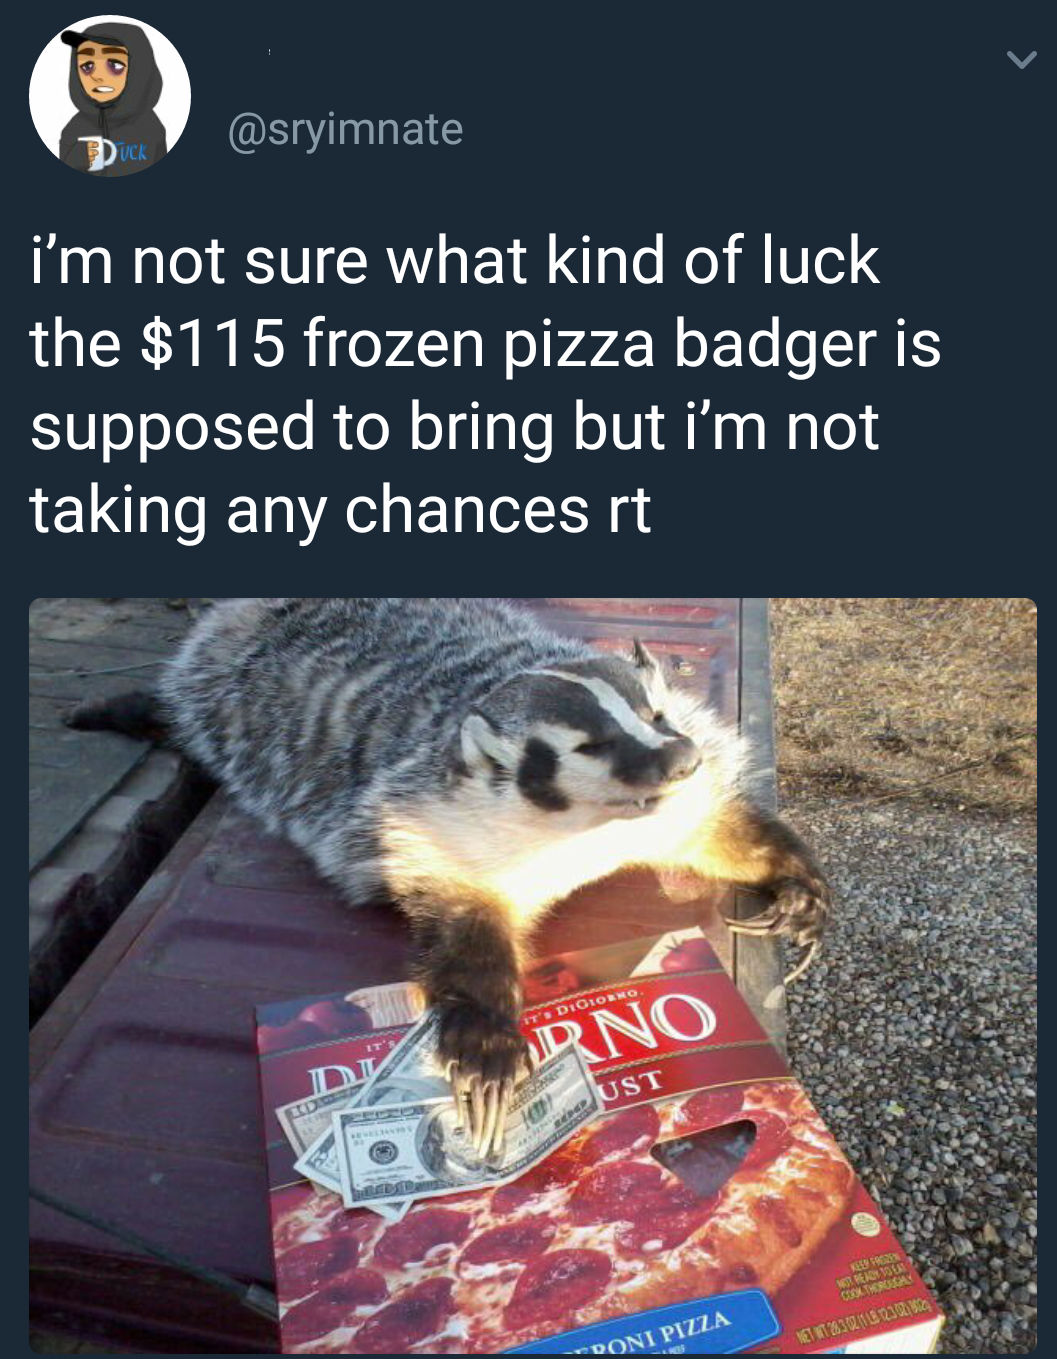 $115 frozen pizza badger - i'm not sure what kind of luck the $115 frozen pizza badger is supposed to bring but i'm not taking any chances rt Rno Ust Soni Pizza